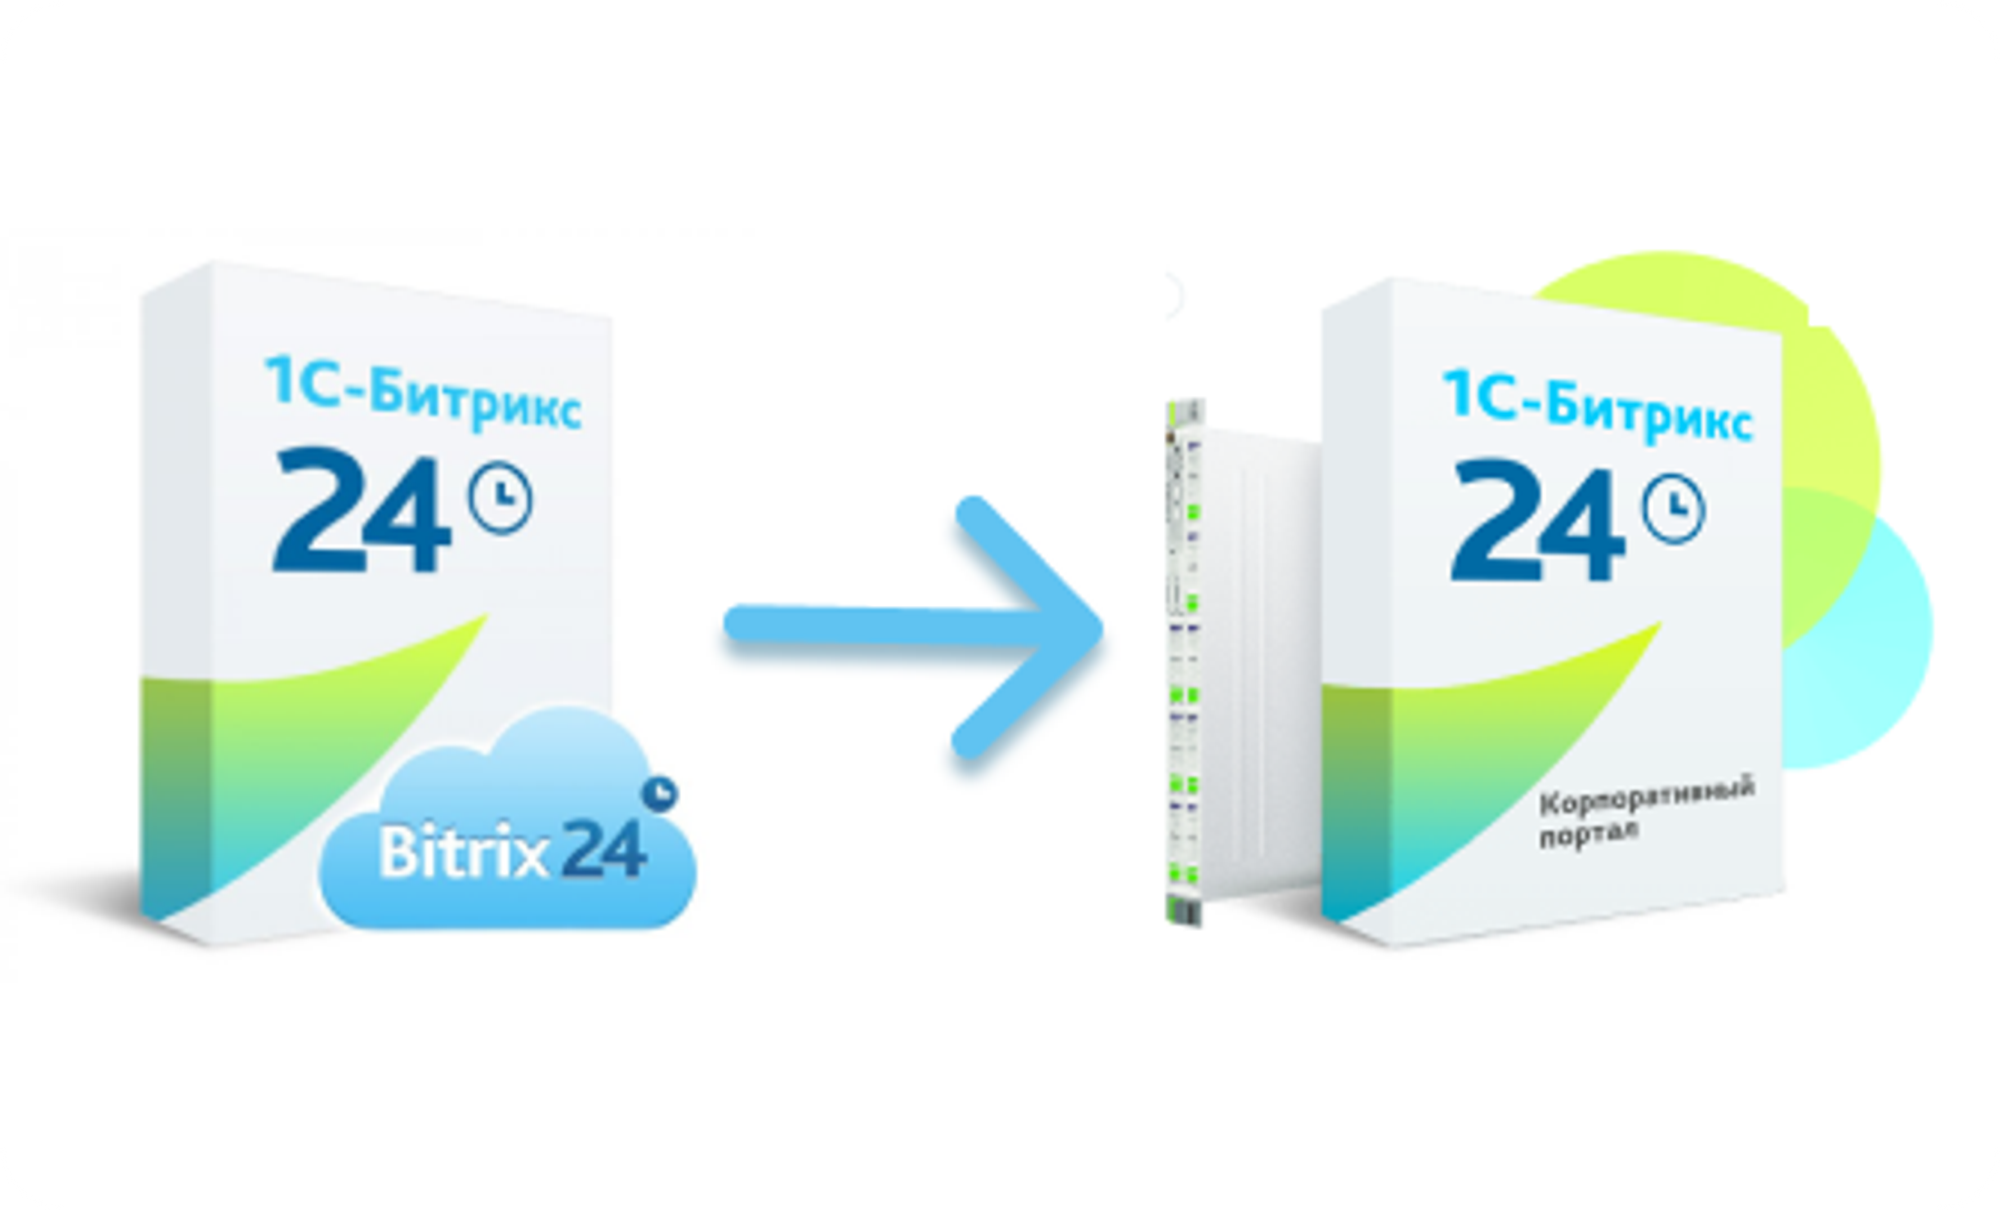 Switching from the cloud version of Bitrix24 to the boxed version